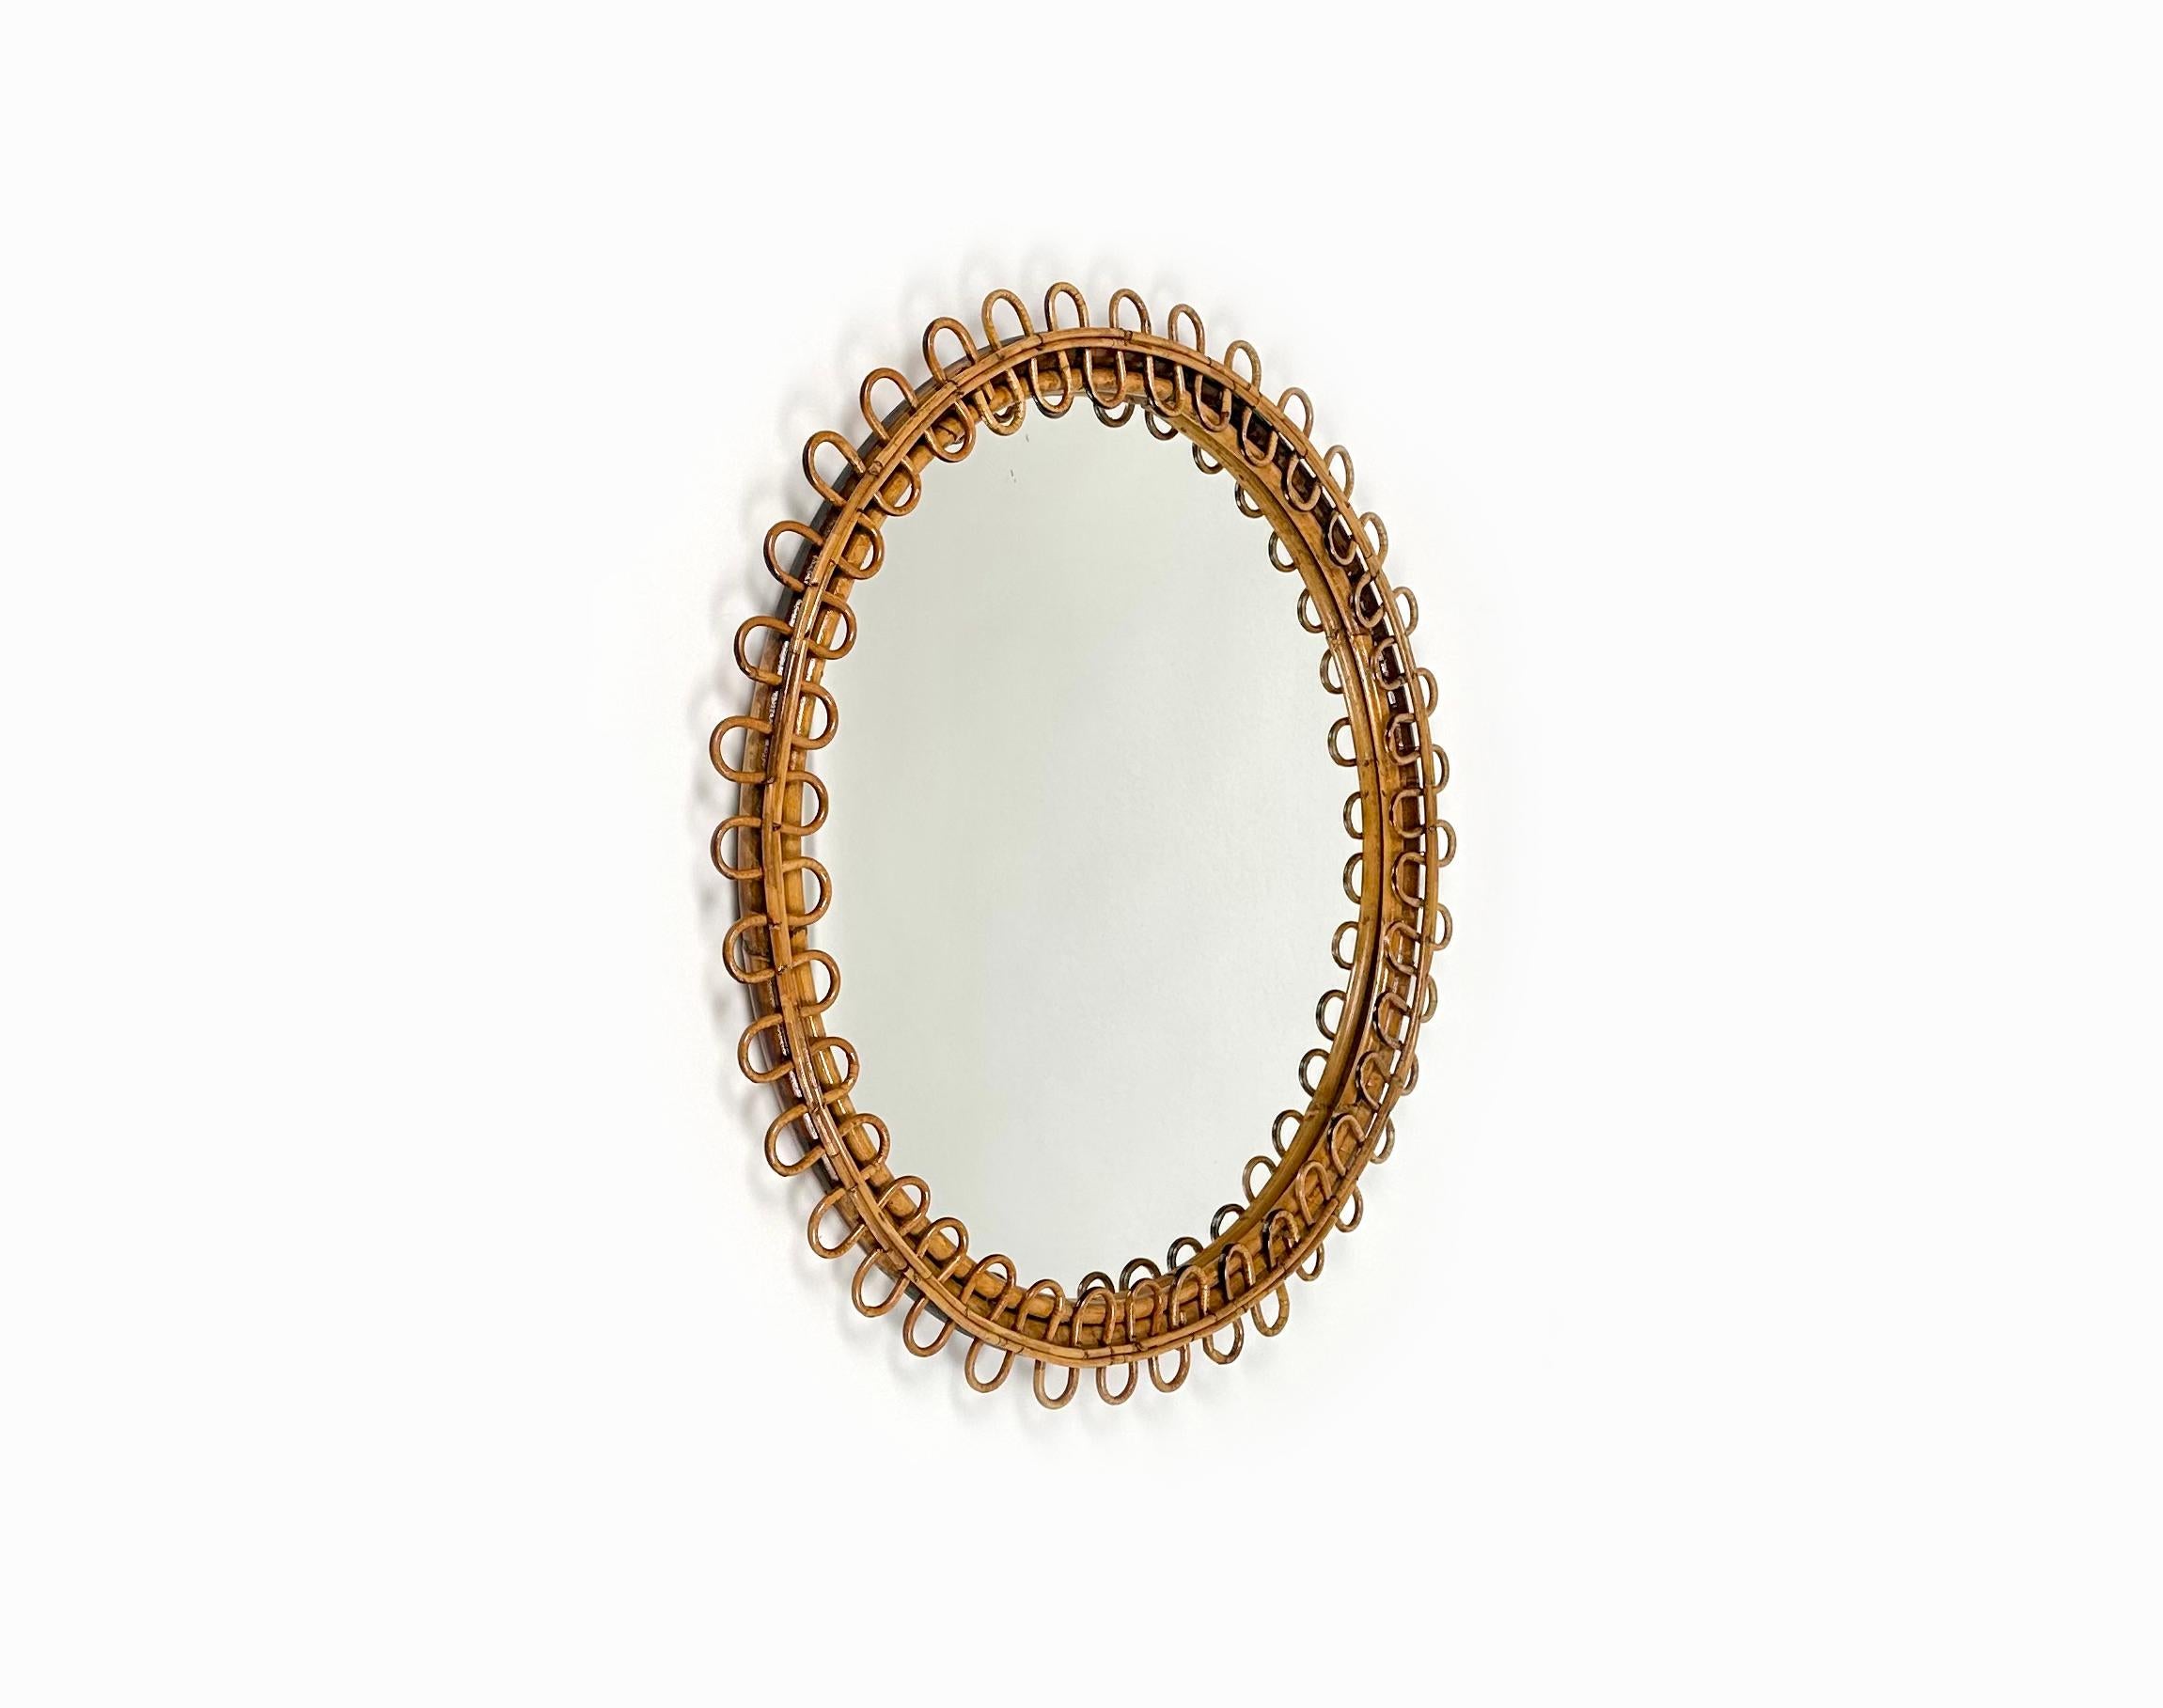 Midcentury beautiful round wall mirror framed by bamboo and rattan in the style of Franco Albini. 

A highly decorative mirror with undulated rattan frame. 

Made in Italy in the 1960s. 

Bamboo / rattan has been polished by a professional